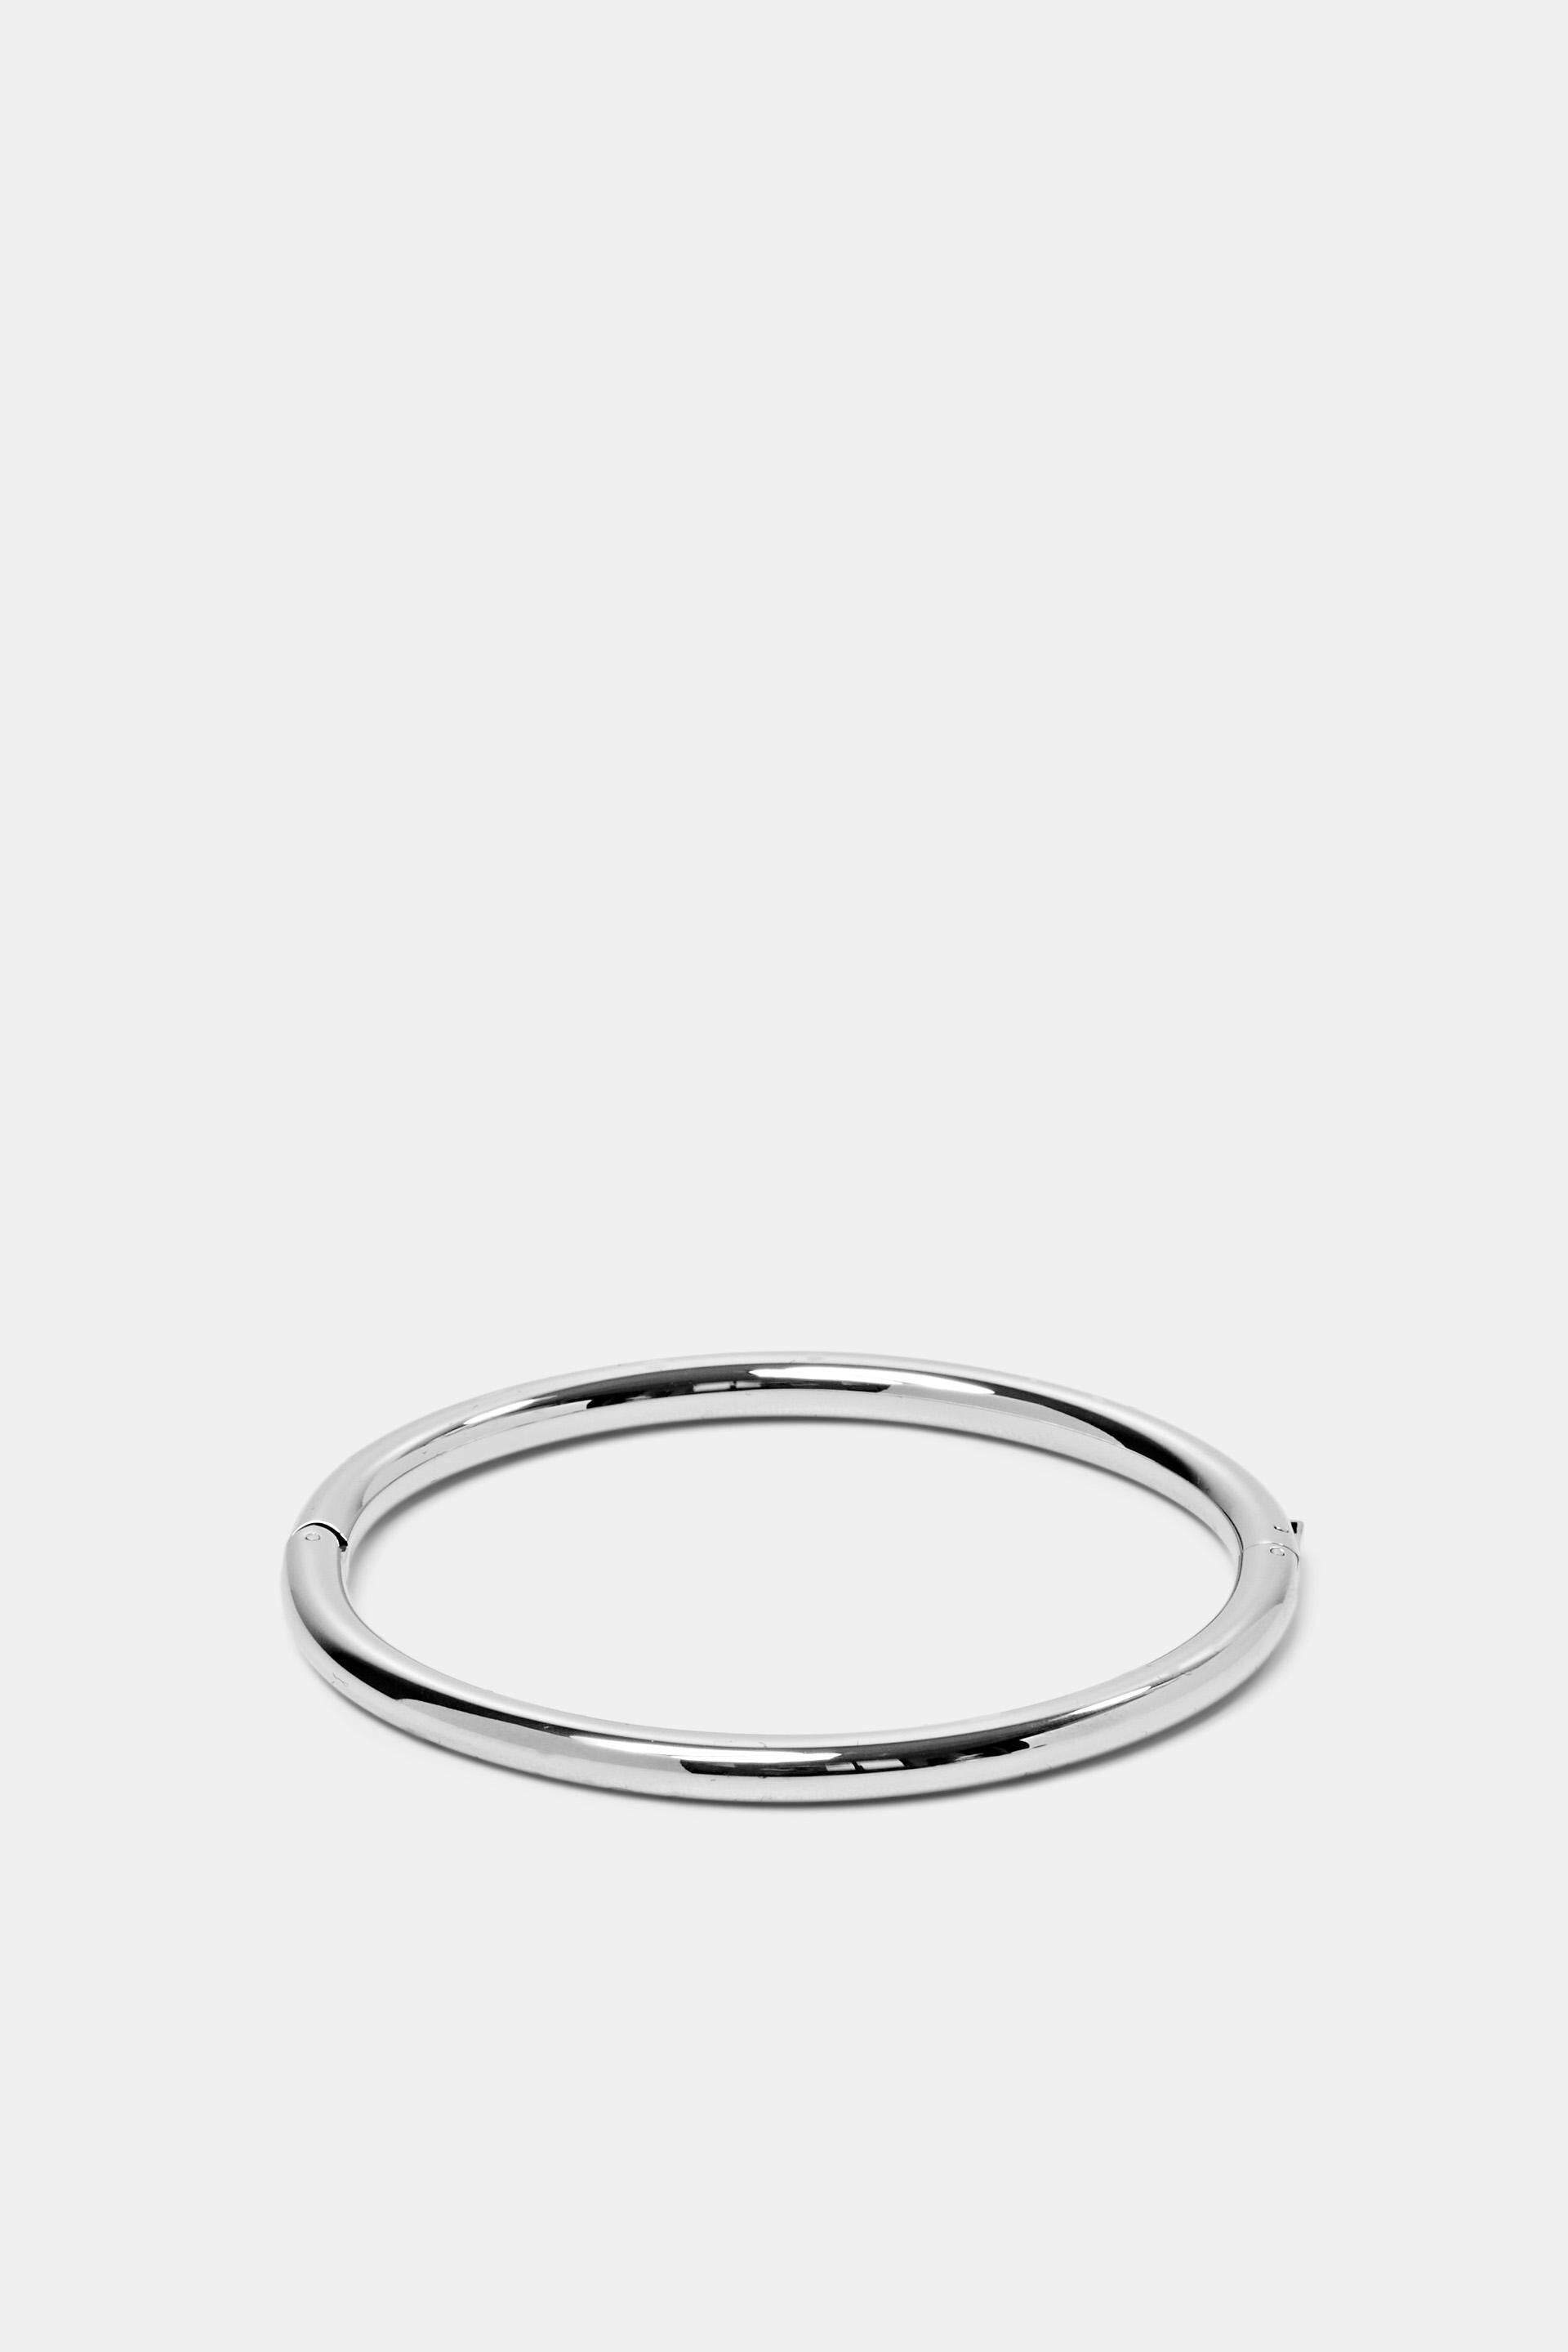 Esprit steel Bangle made of stainless